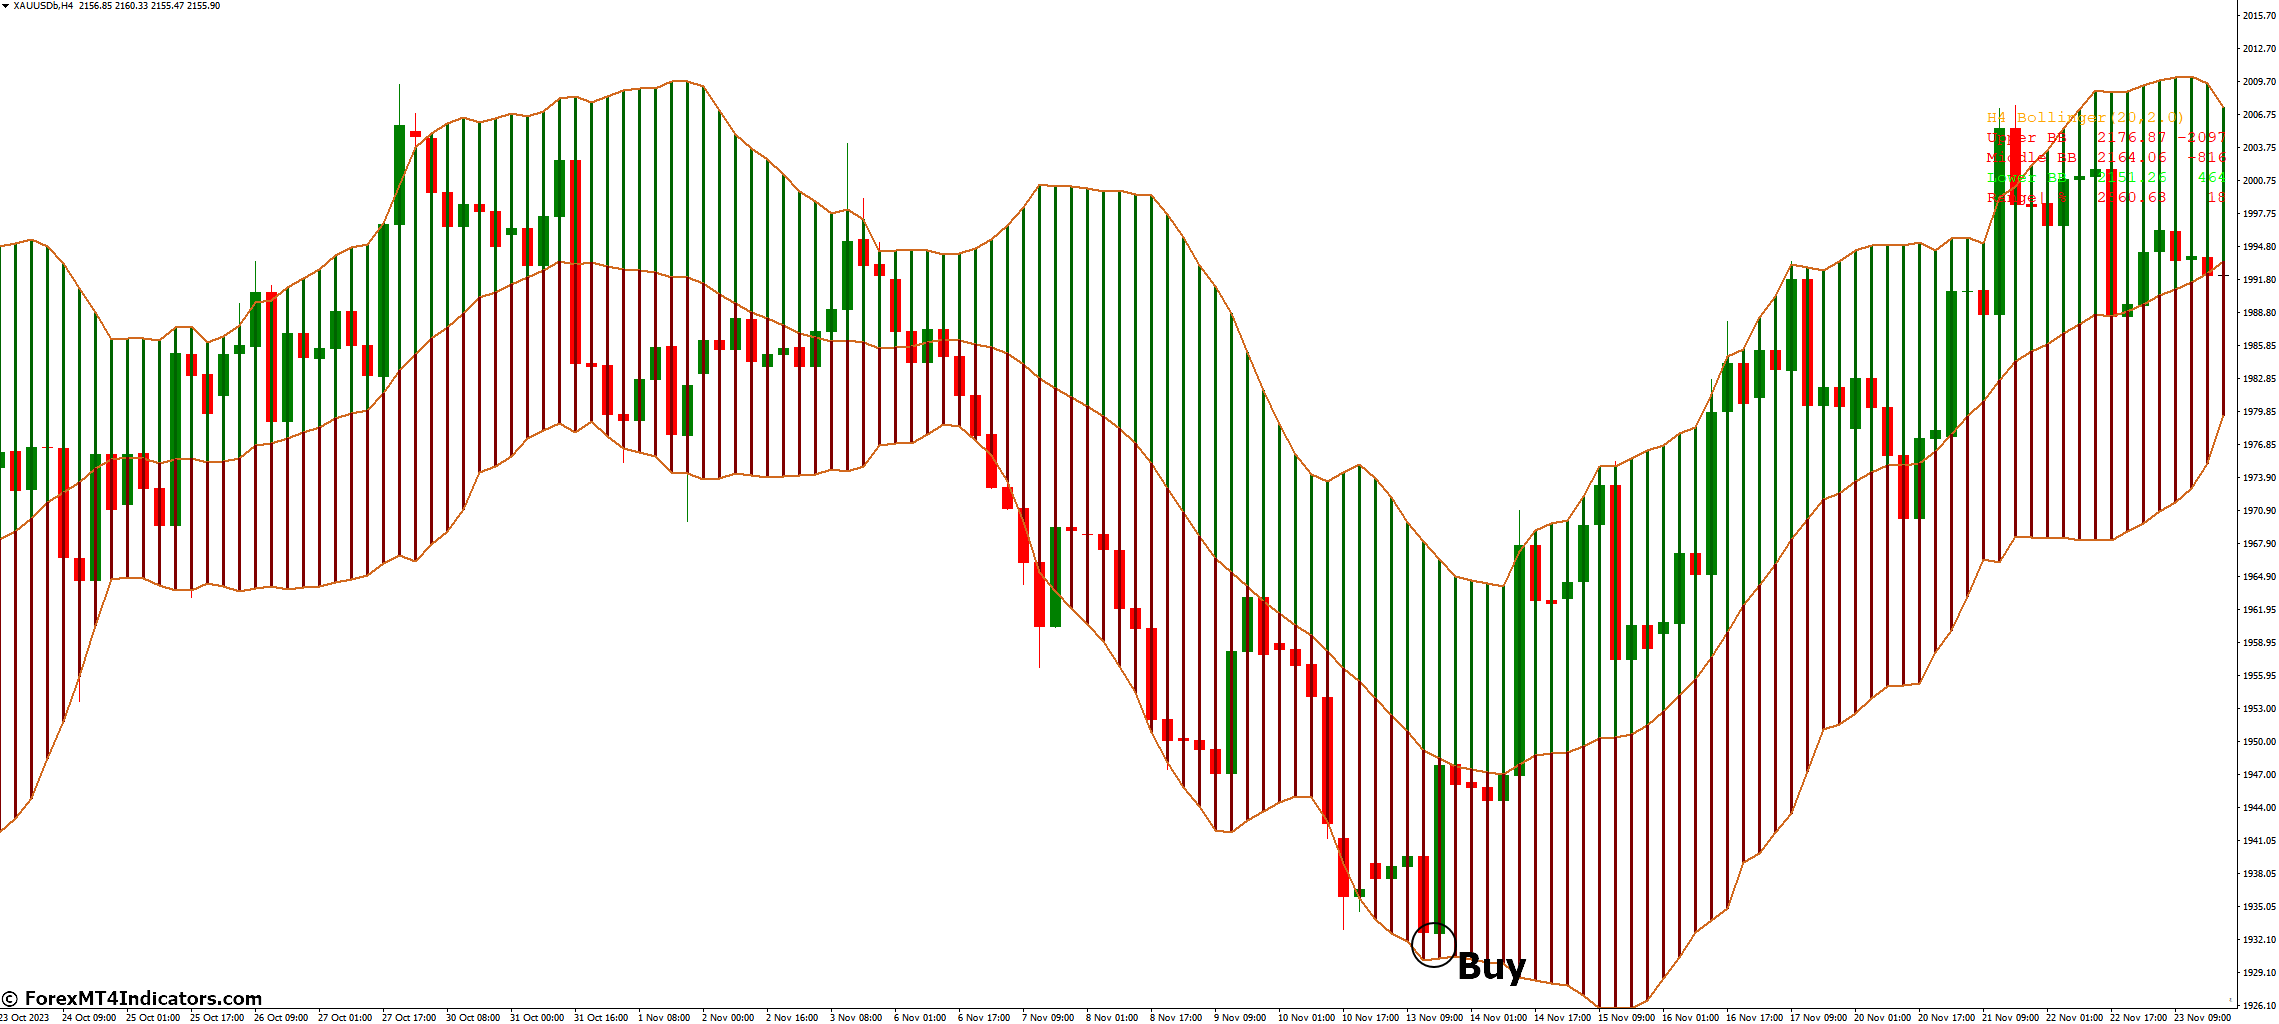 How to Trade with Advanced Bollinger Bands Indicator - Buy Entry